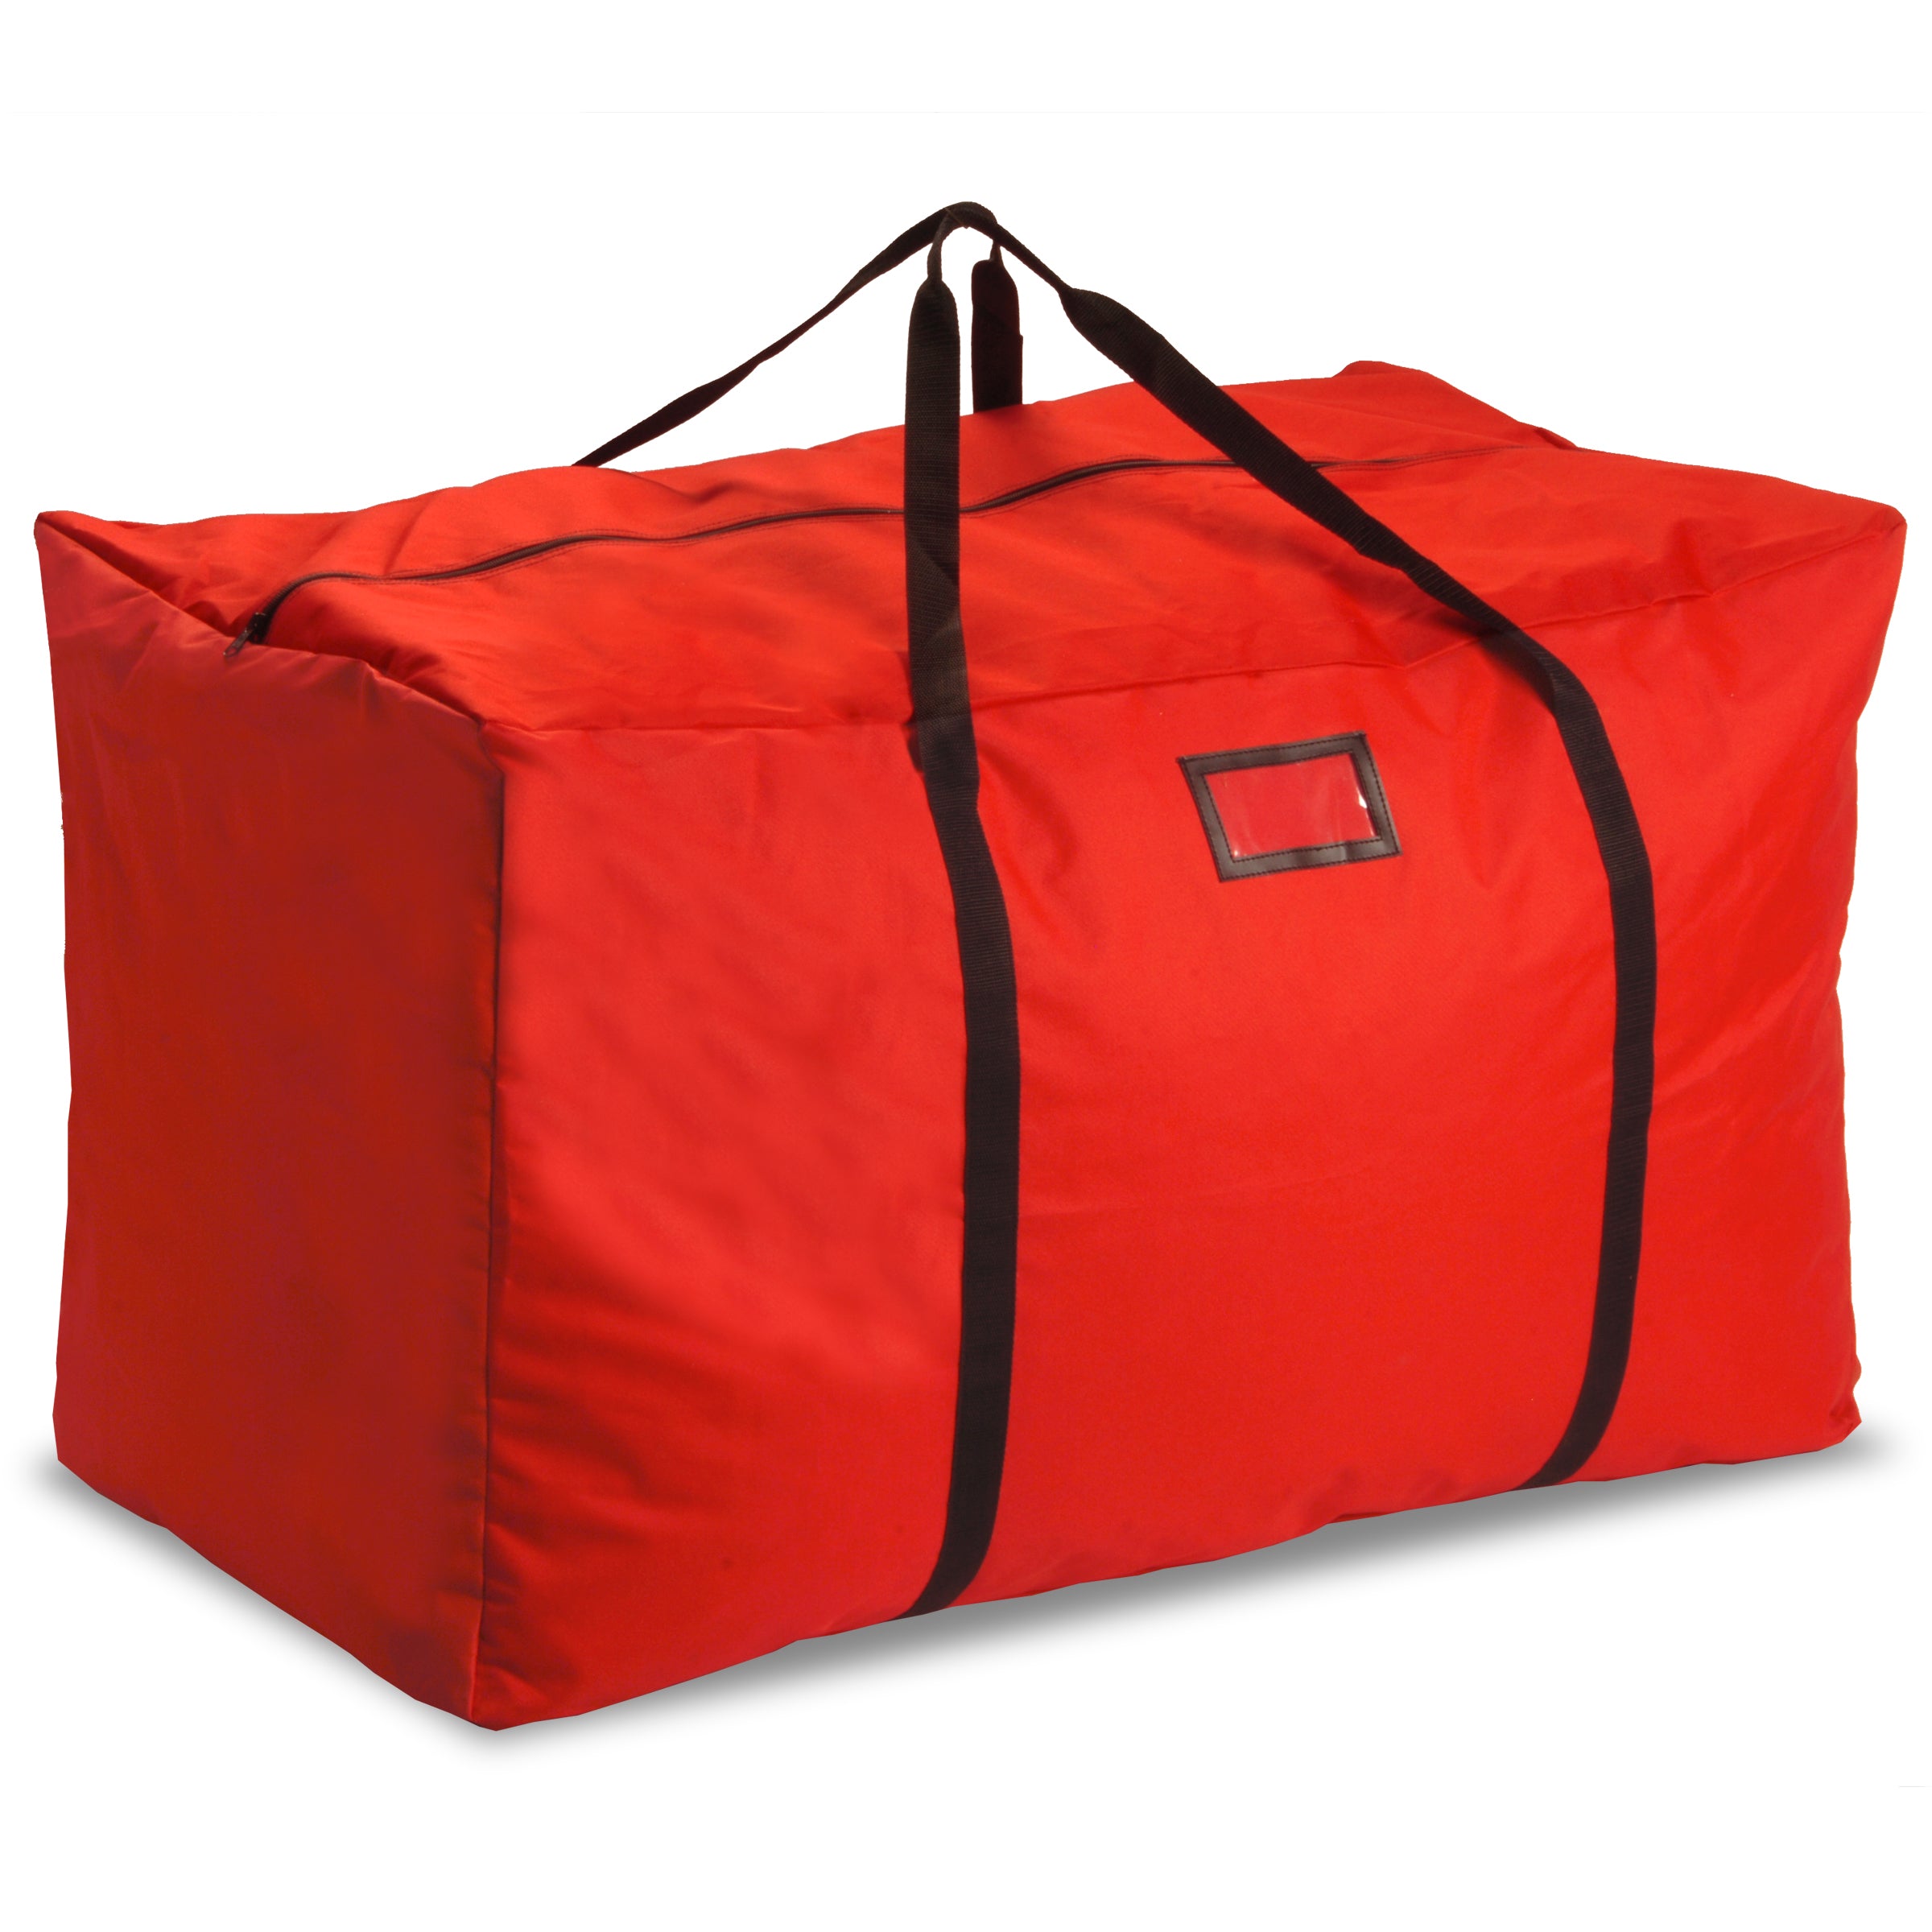 National Tree Dy16-77008-1 Red Multi Purpose Large Holiday Storage Bag